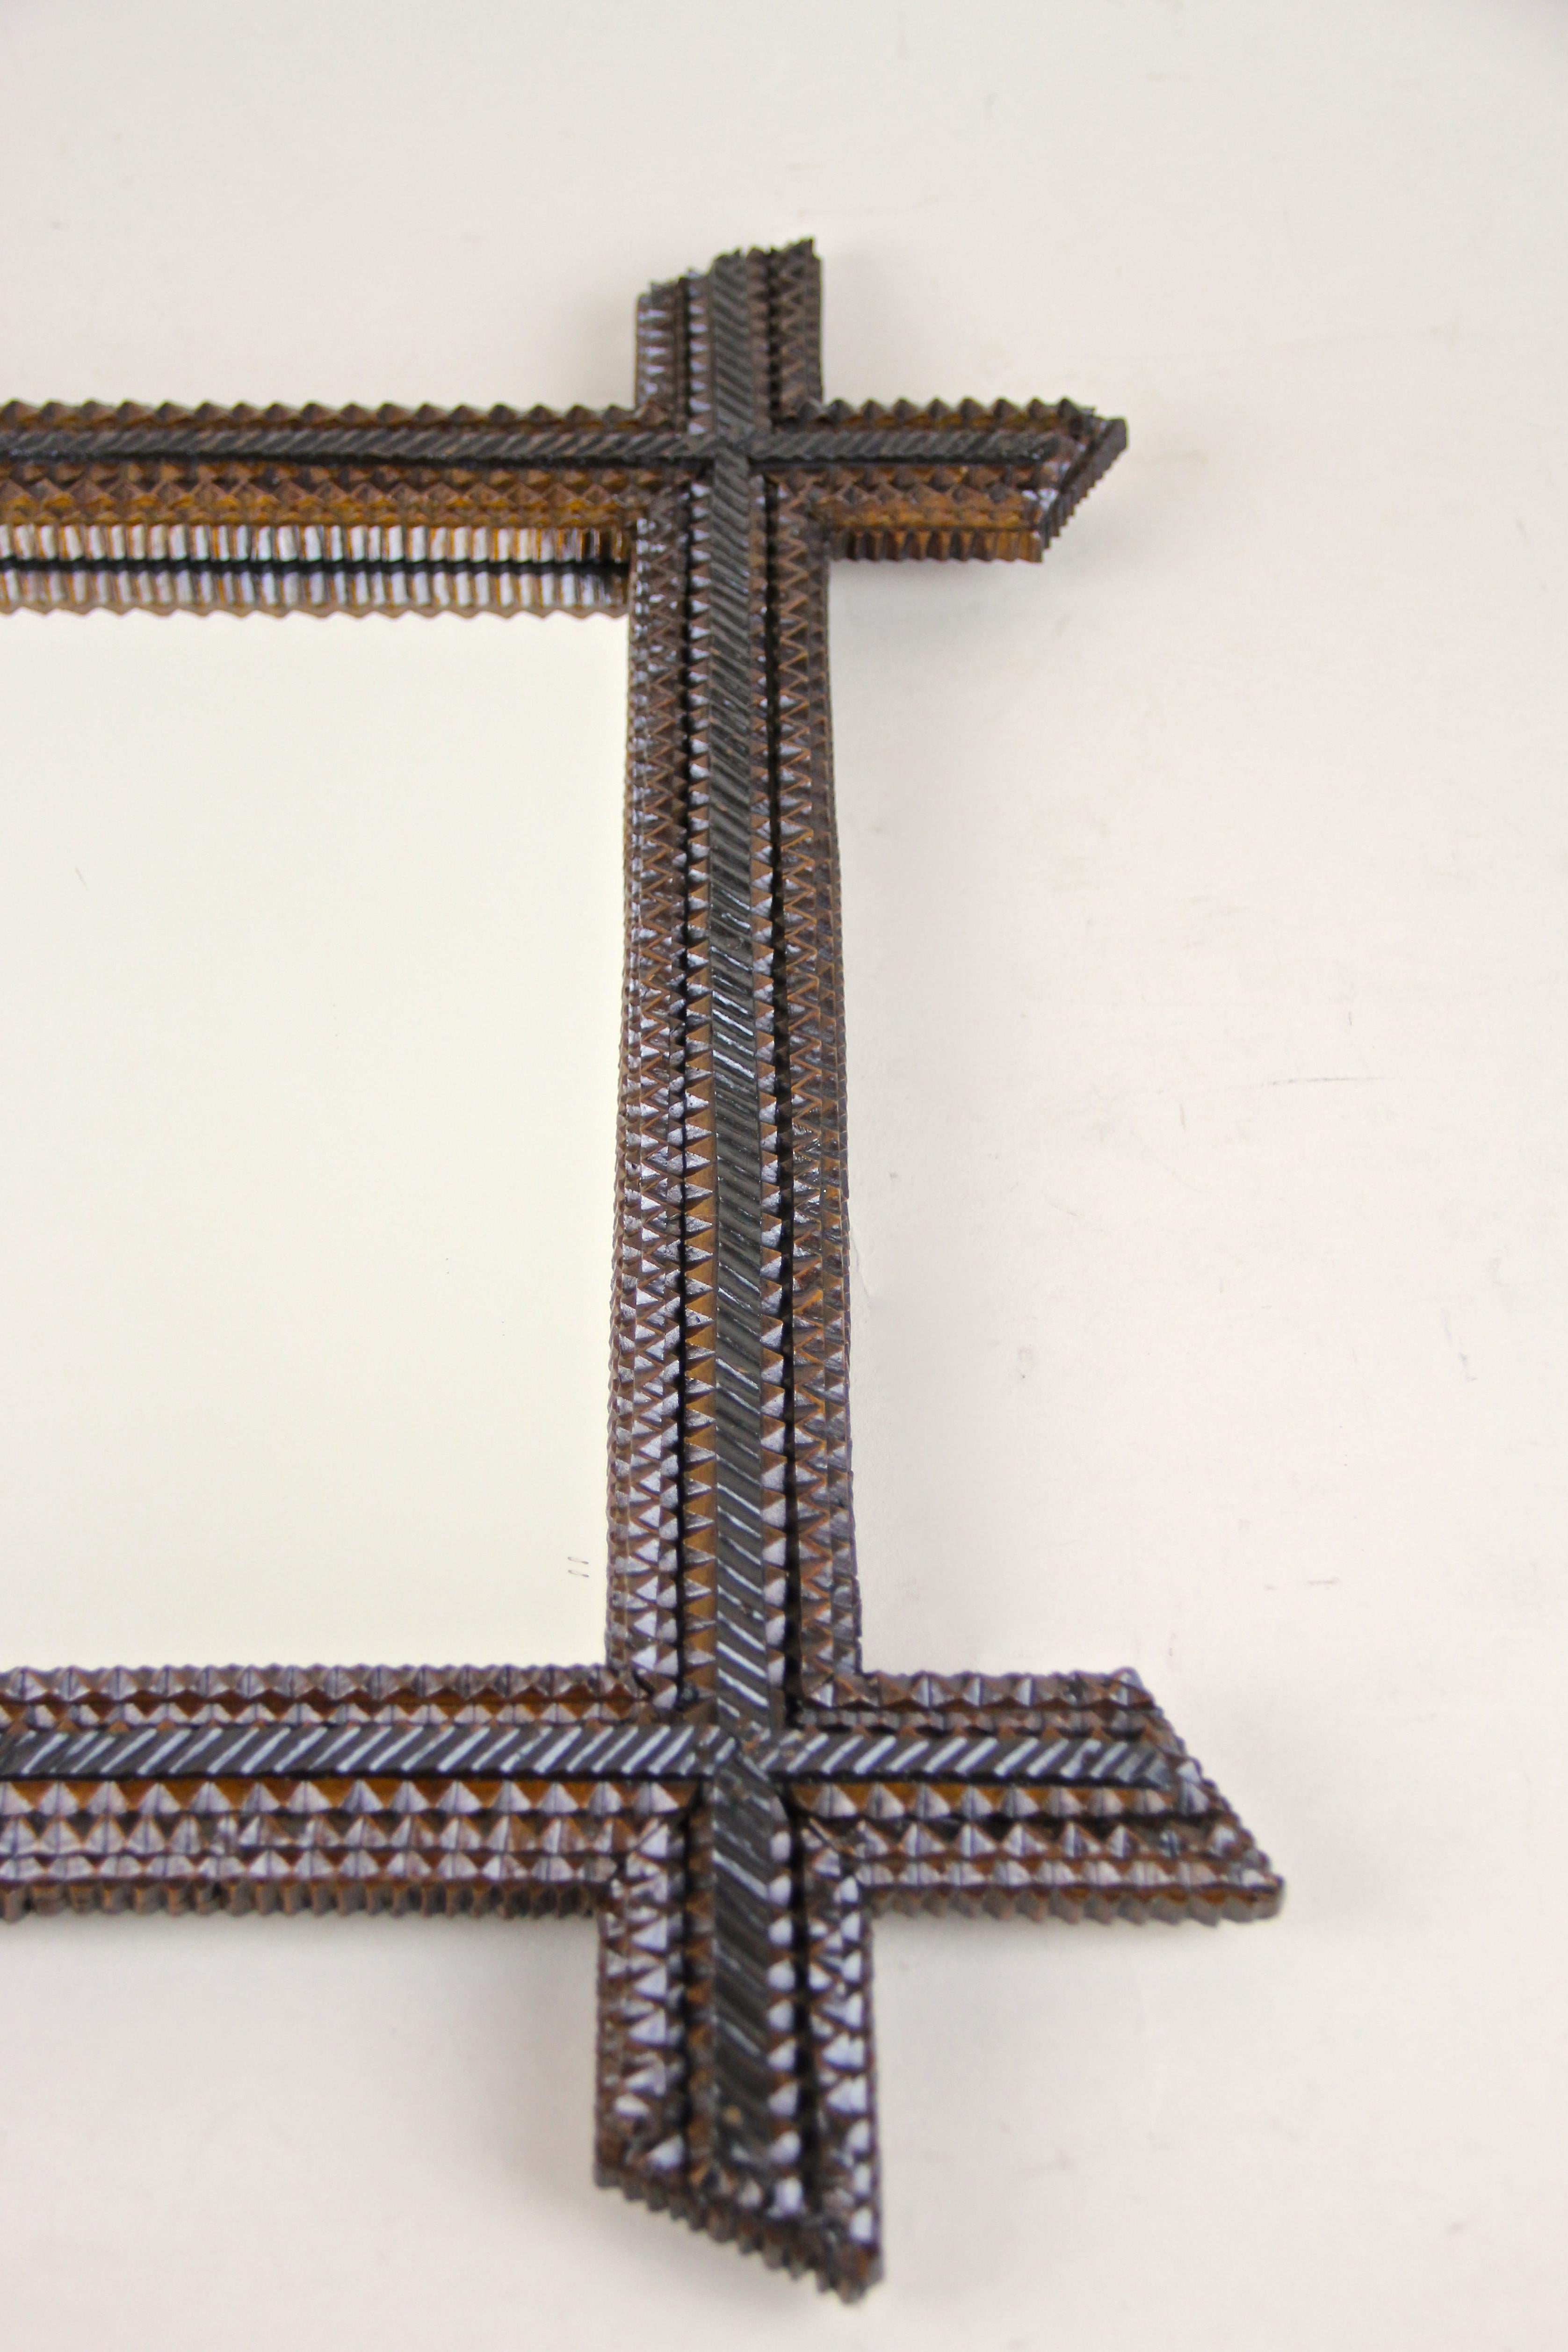 Chip Carved Rustic Tramp Art Wall Mirror, Austria, circa 1880 For Sale 4